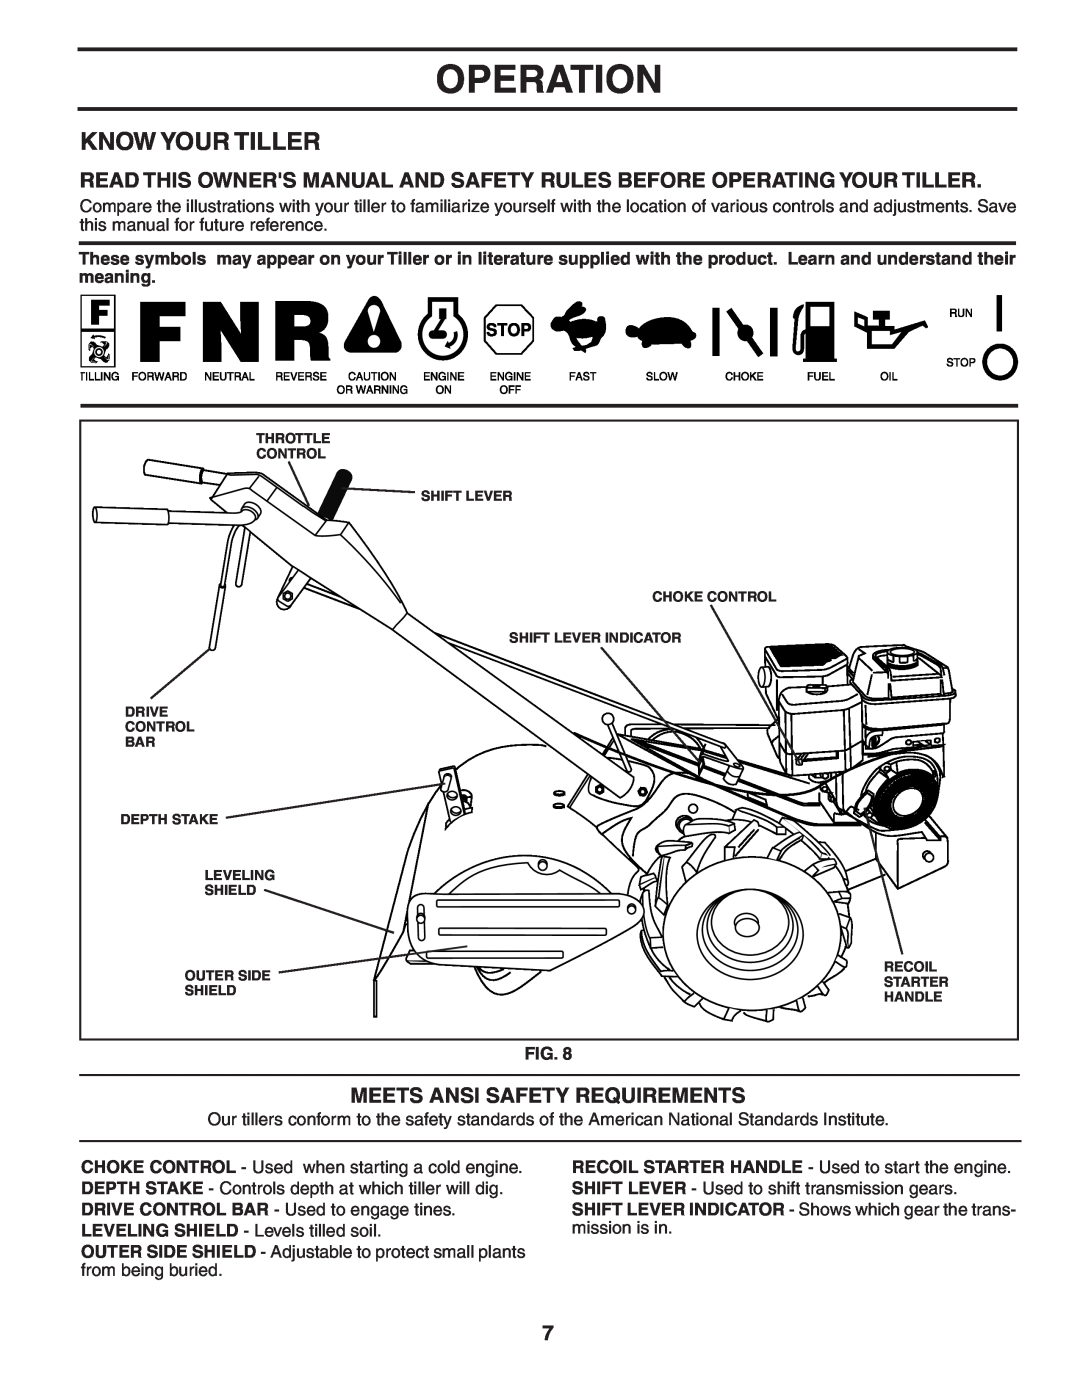 Poulan 401434 manual Operation, Know Your Tiller, Meets Ansi Safety Requirements 